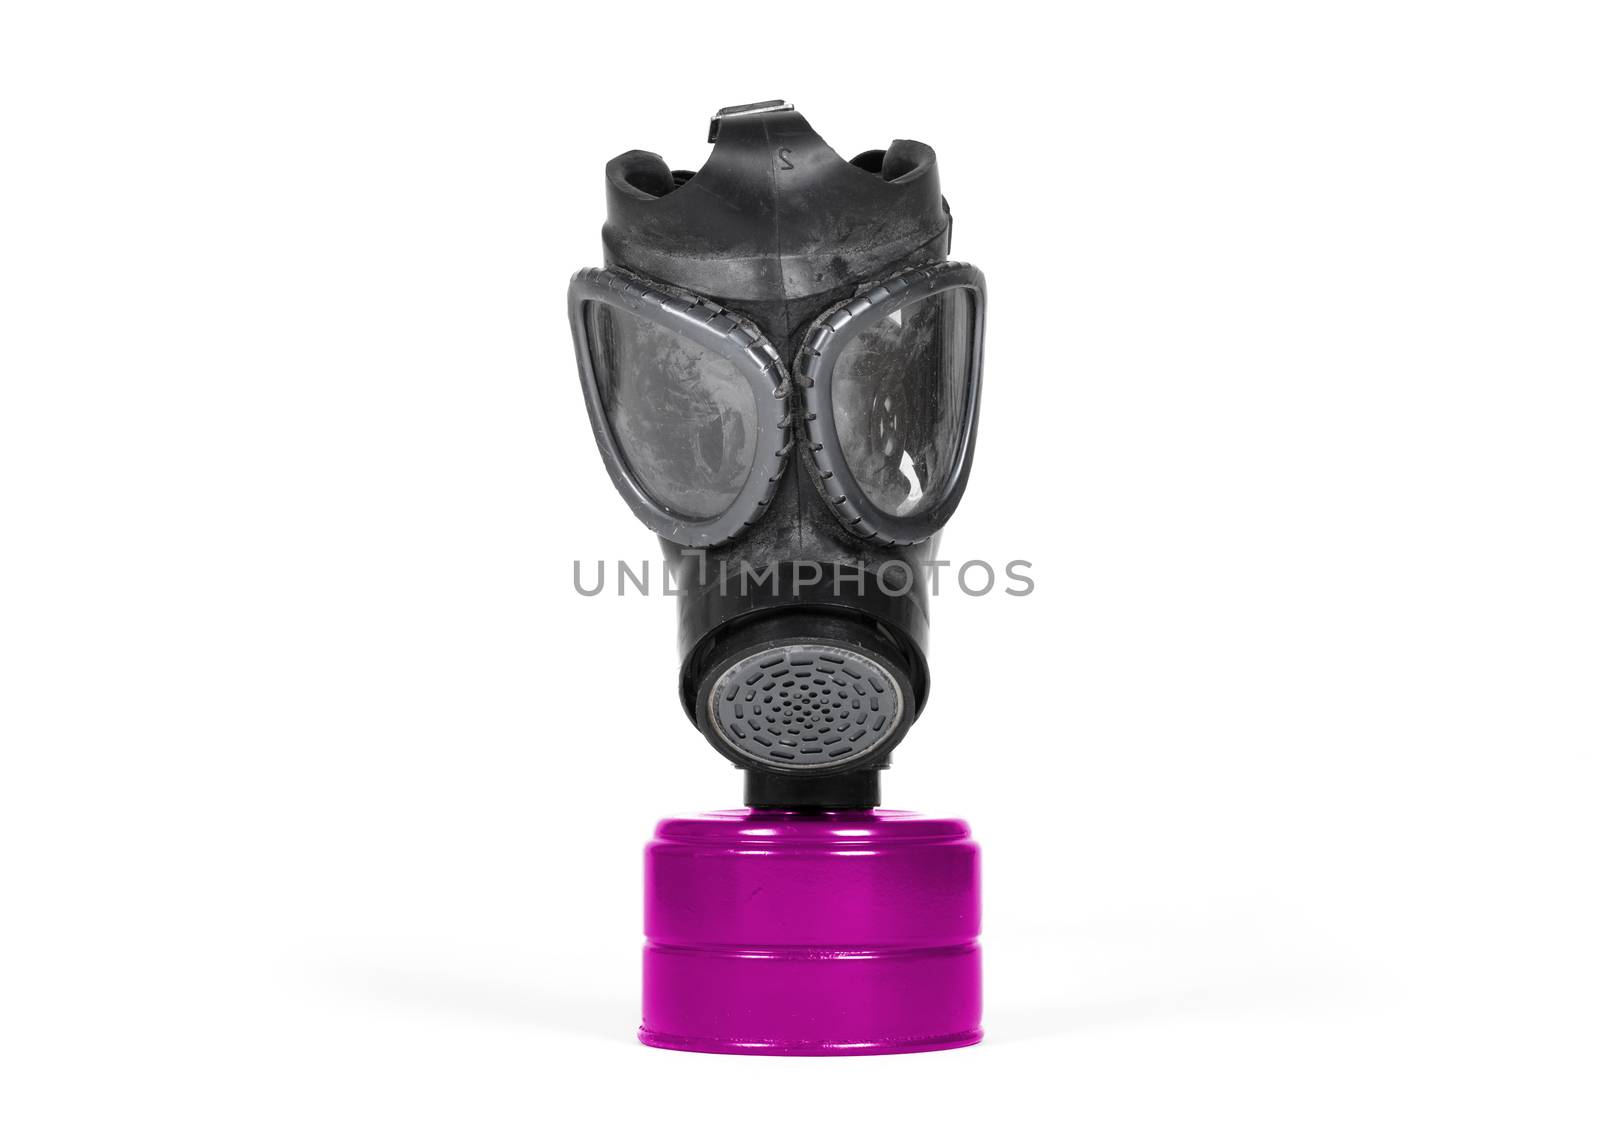 Vintage gasmask isolated on a white background - Purple filter